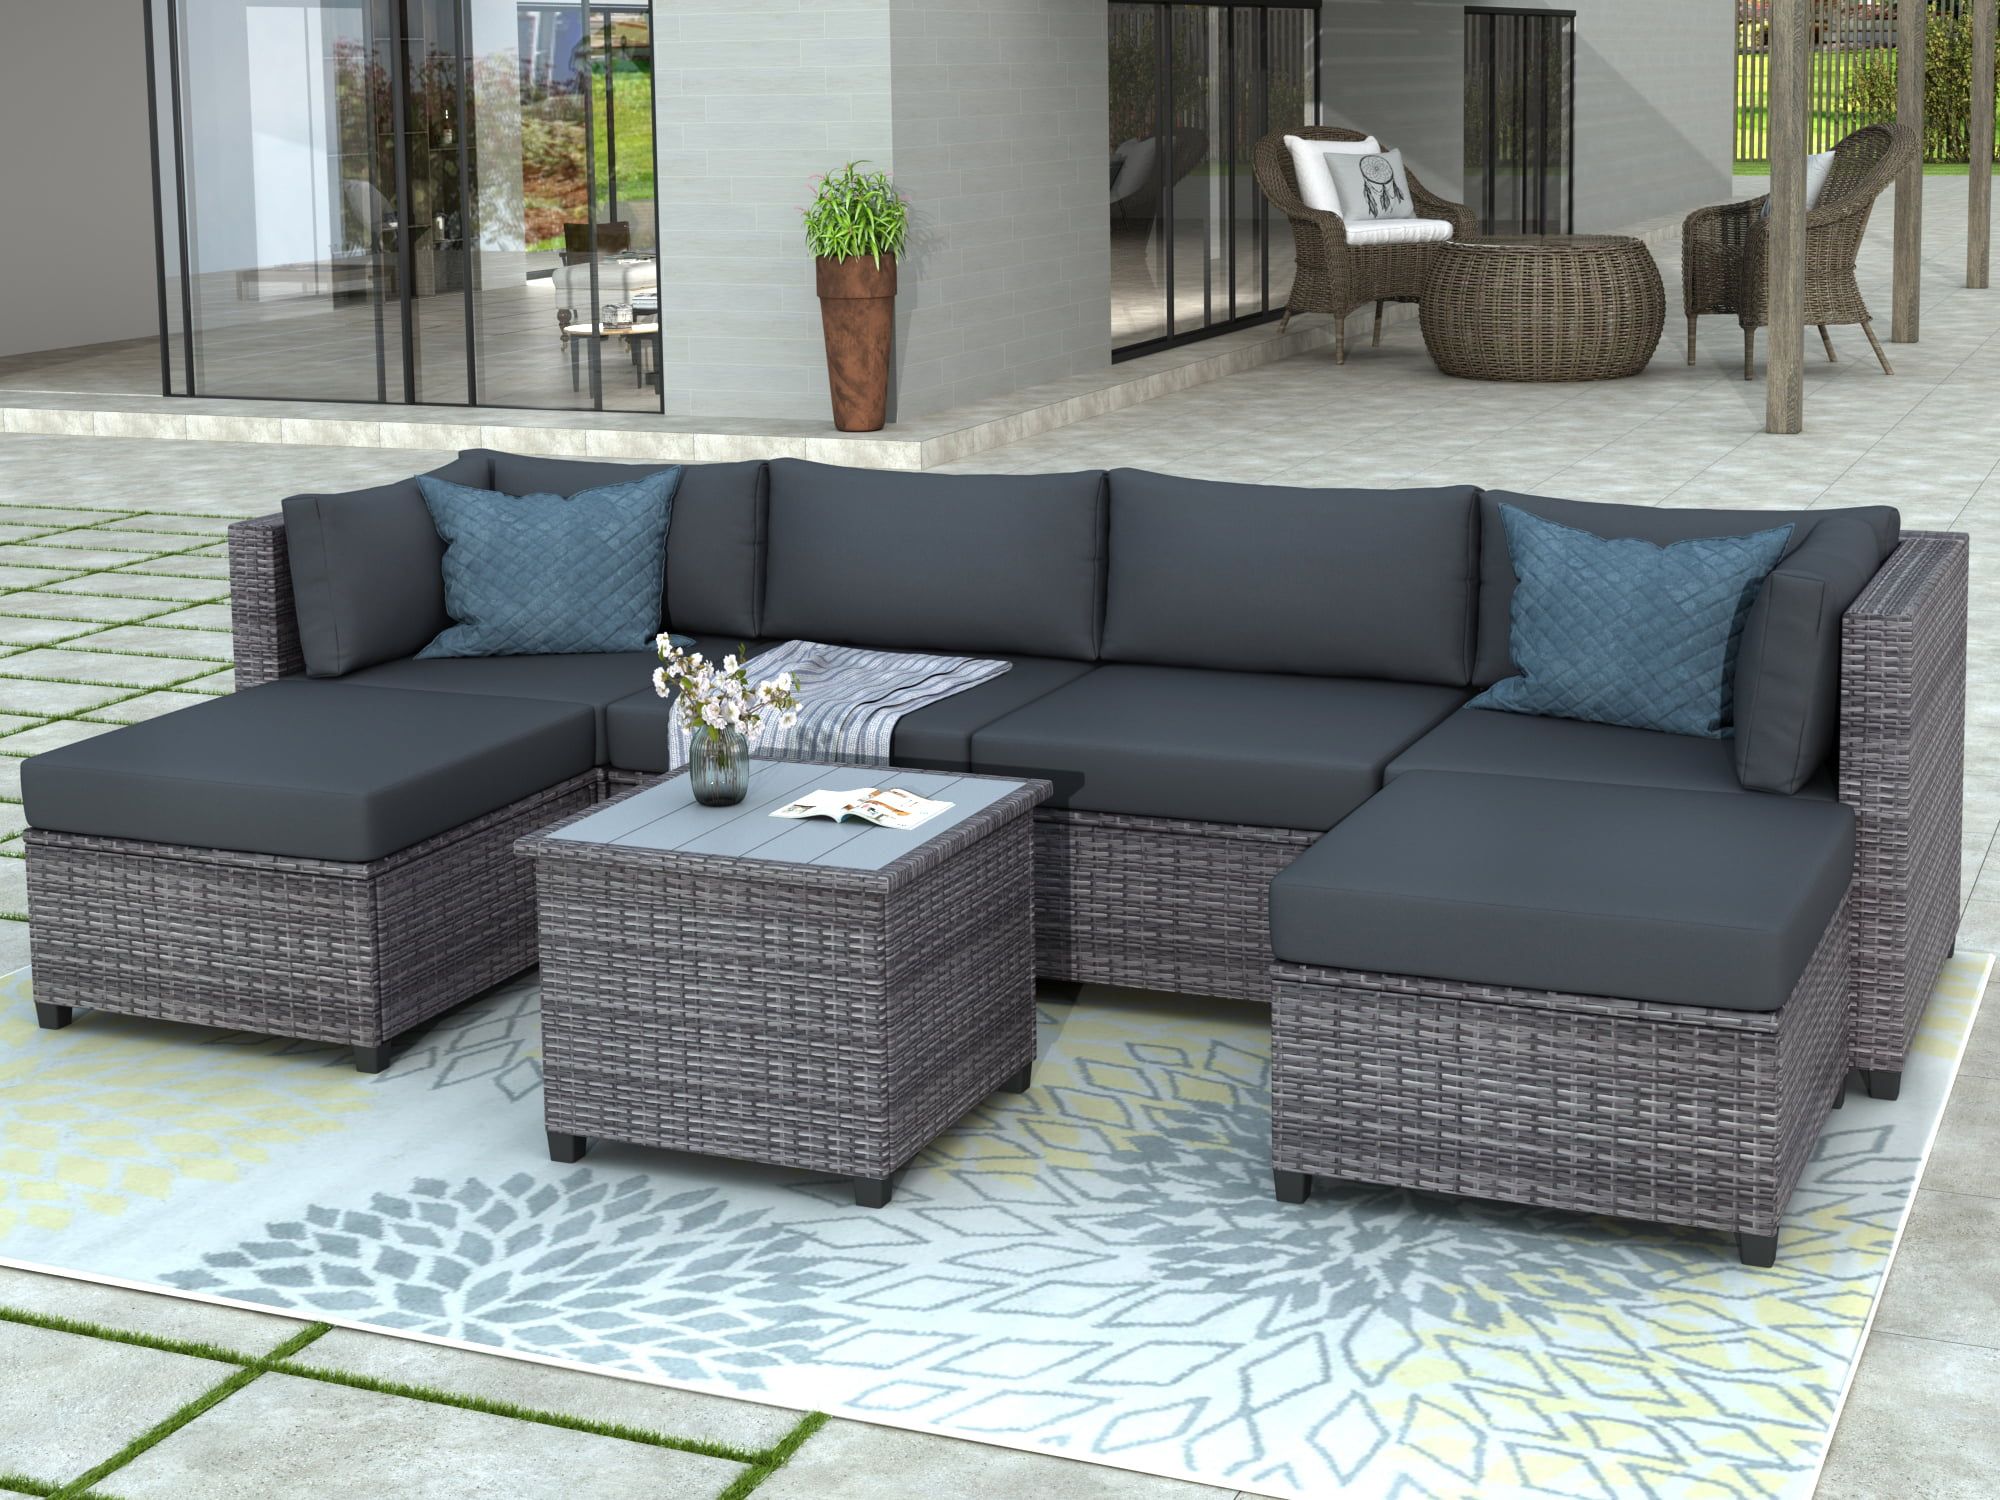 7 Piece Patio Sectional Sofa Set With 4 Rattan Wicker Chairs, 2 Ottoman, Coffee  Table, All Weather Outdoor Conversation Set With Gray Cushions For  Backyard, Porch, Garden, Poolside, L5018 – Walmart With Regard To Outdoor Rattan Sectional Sofas With Coffee Table (Photo 4 of 15)